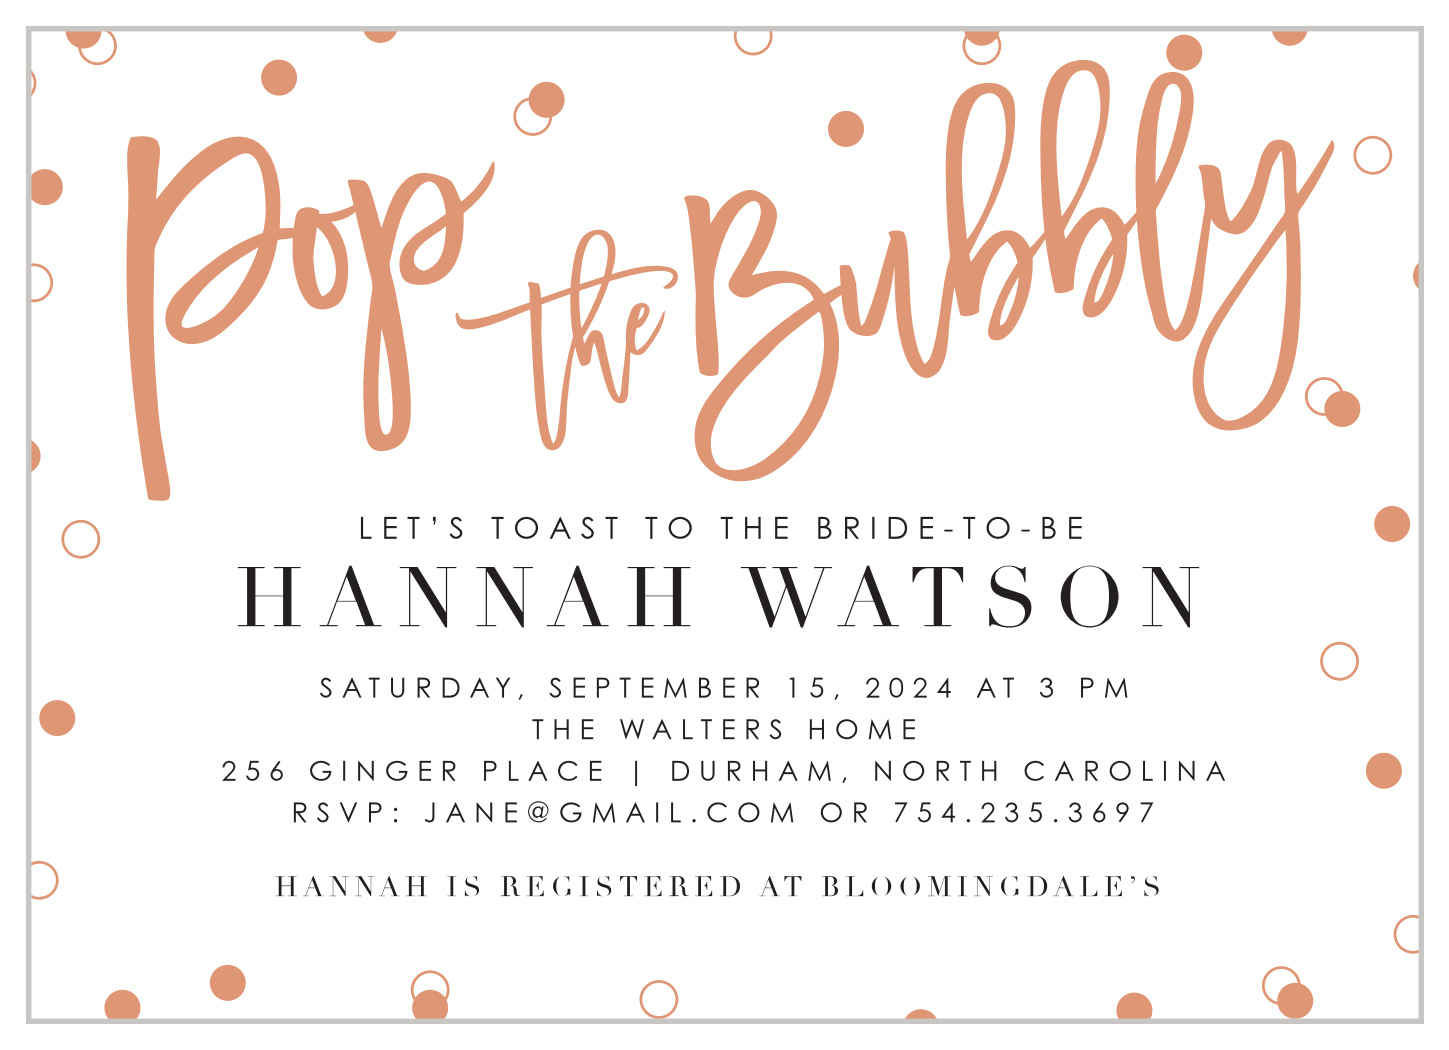 champagne toast bridal shower invitations up